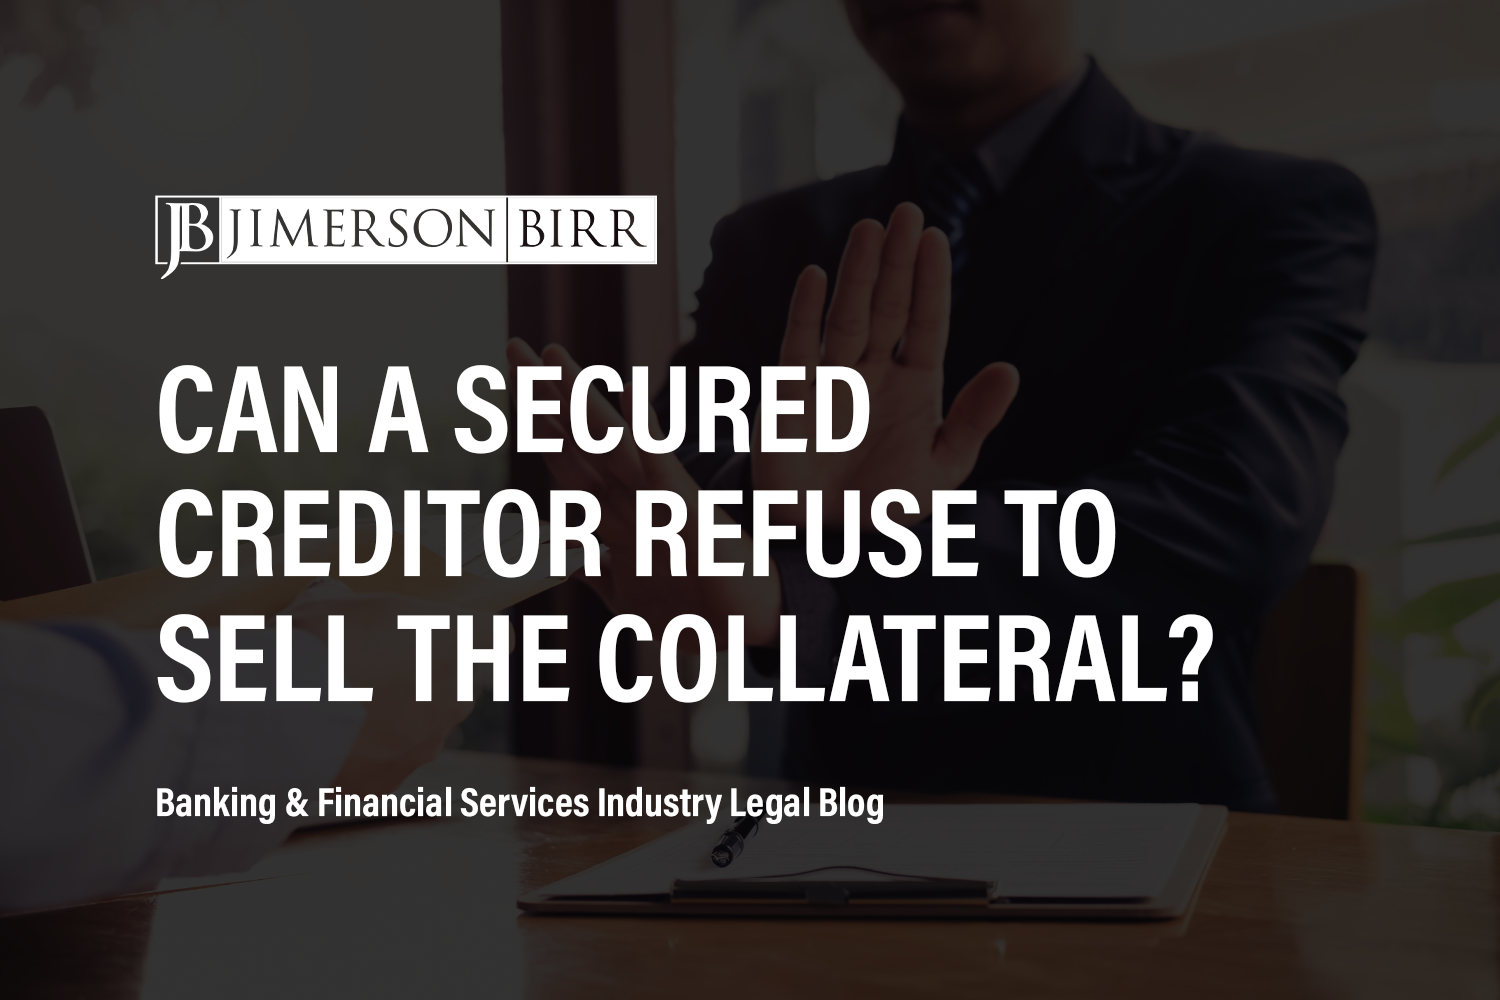 Can a Secured Creditor Refuse to Sell the Collateral?